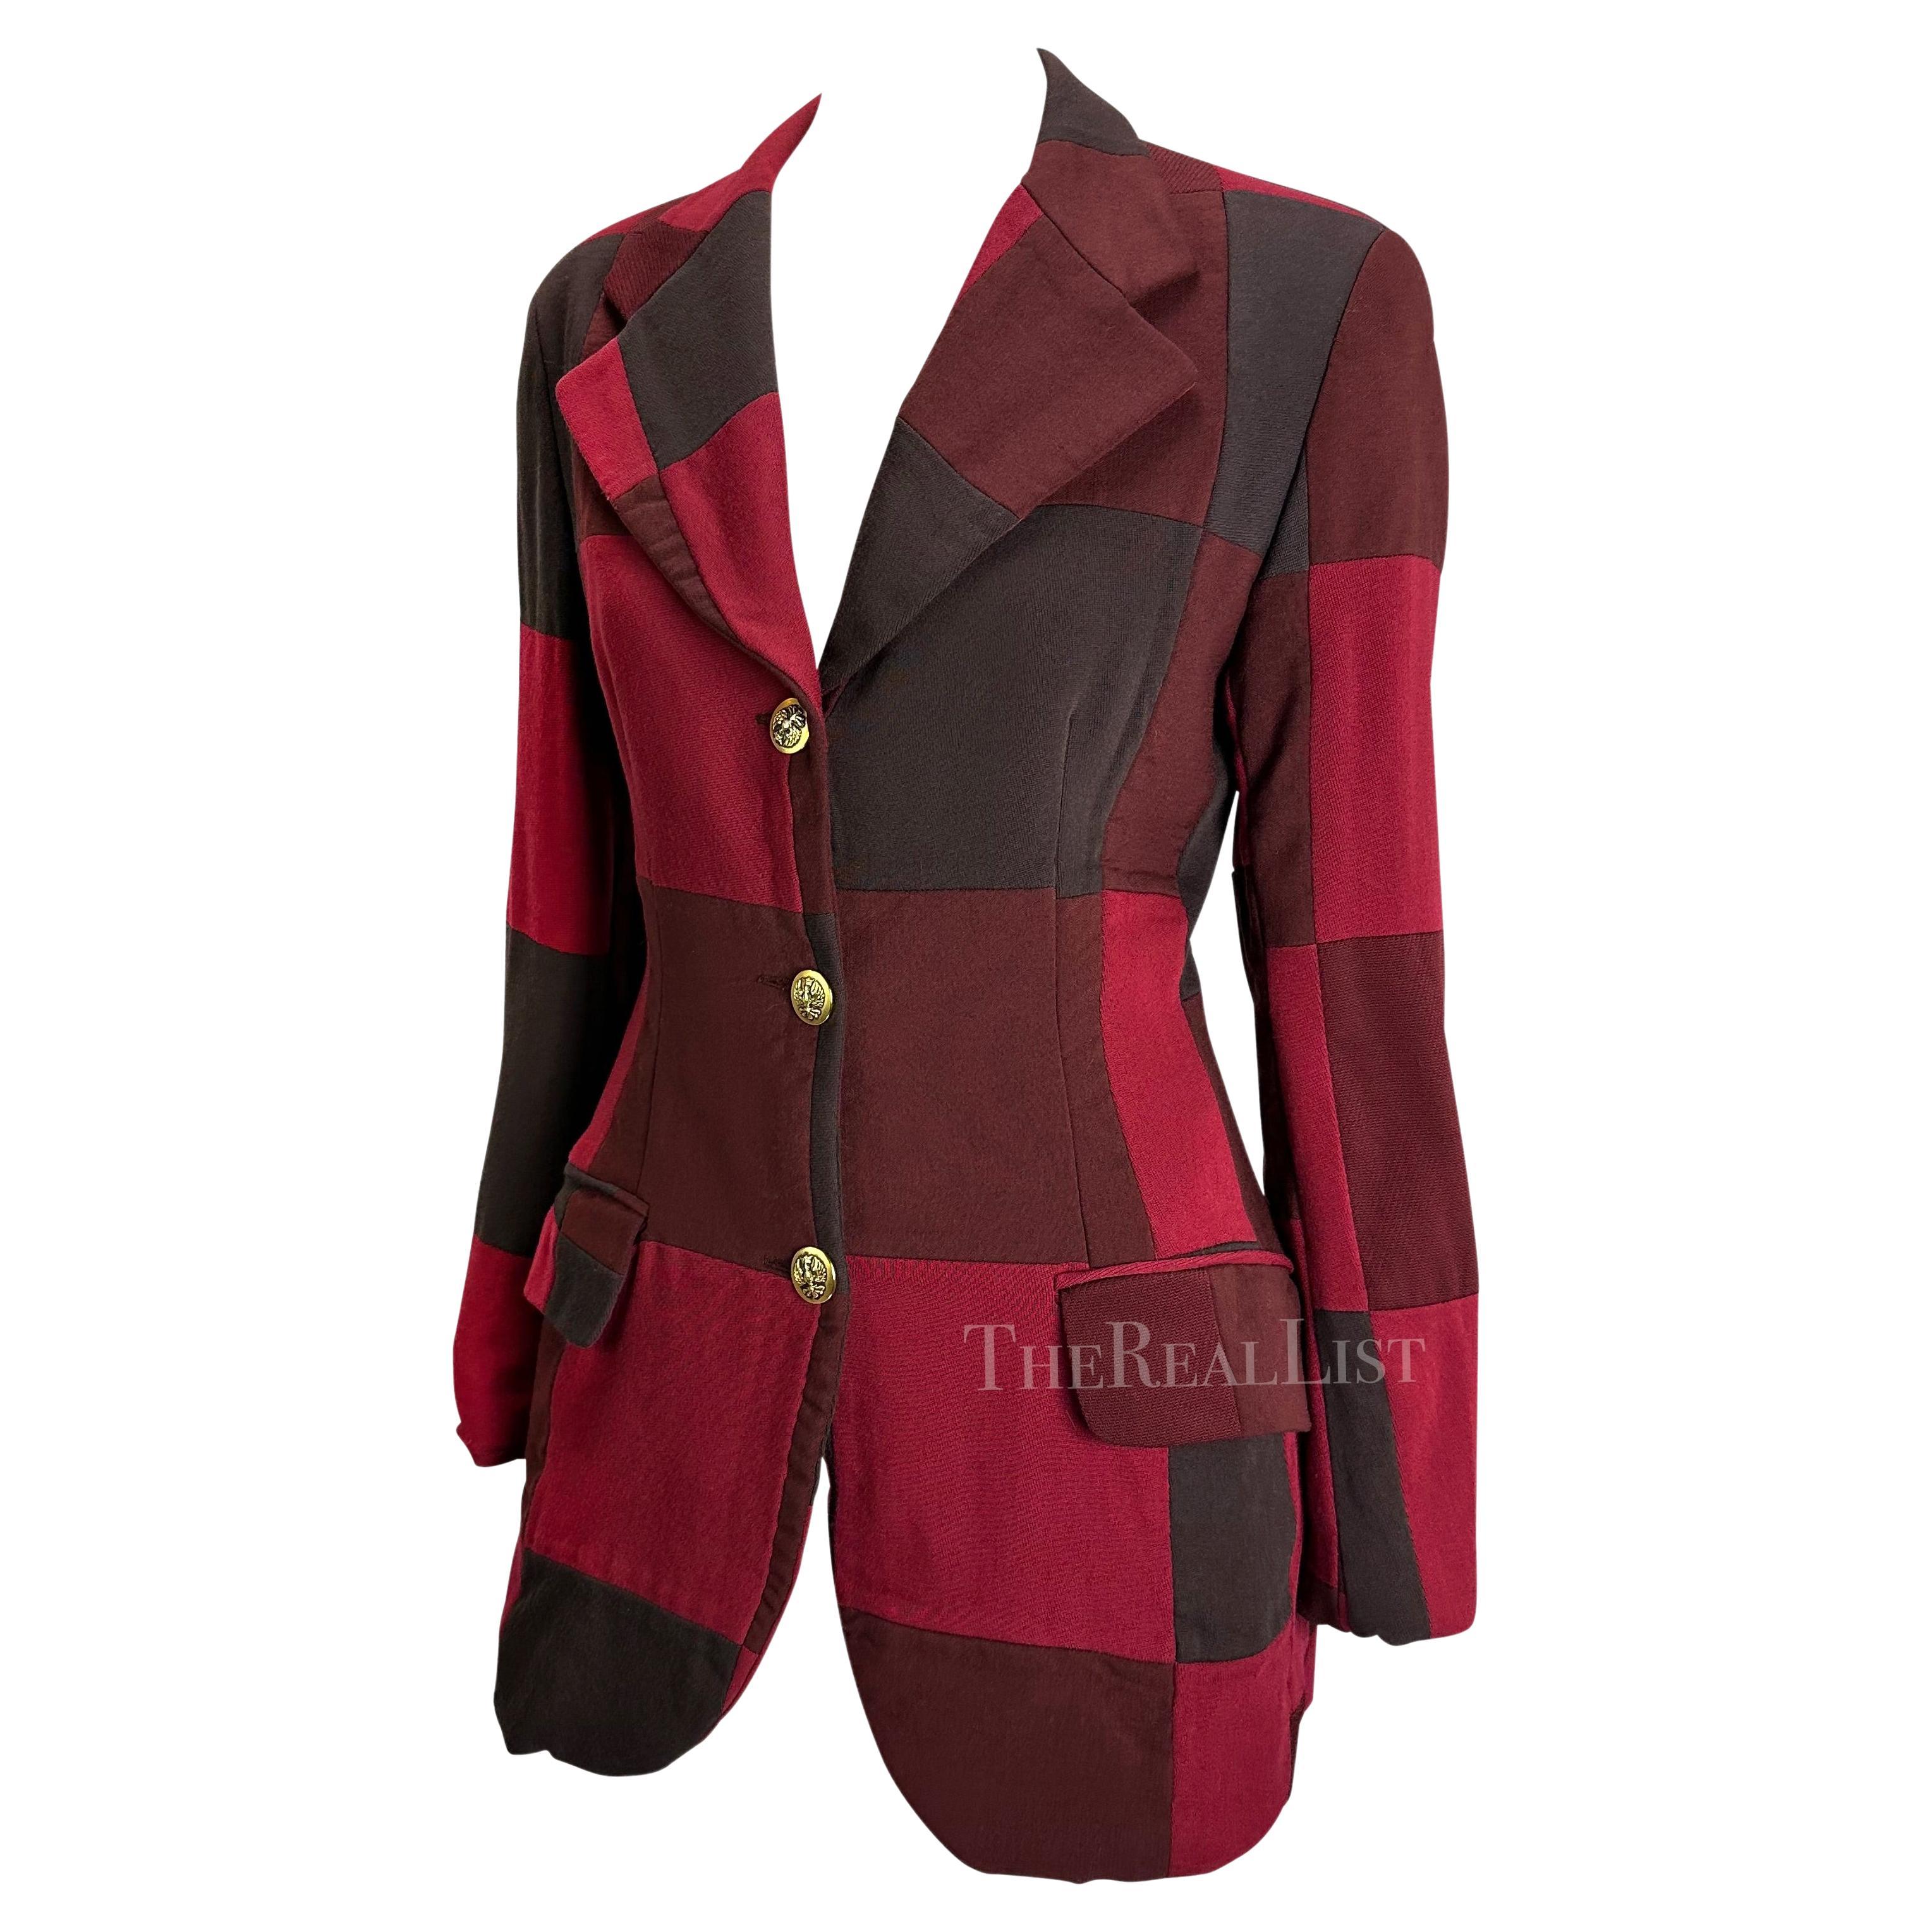 Presenting a fabulous red patchwork Dolce and Gabbana Blazer. From the early 1990s, this jacket is constructed of multiple monochromatic red hue patches and is made complete with a large gold-tone crest button closures at the front. Add this chic